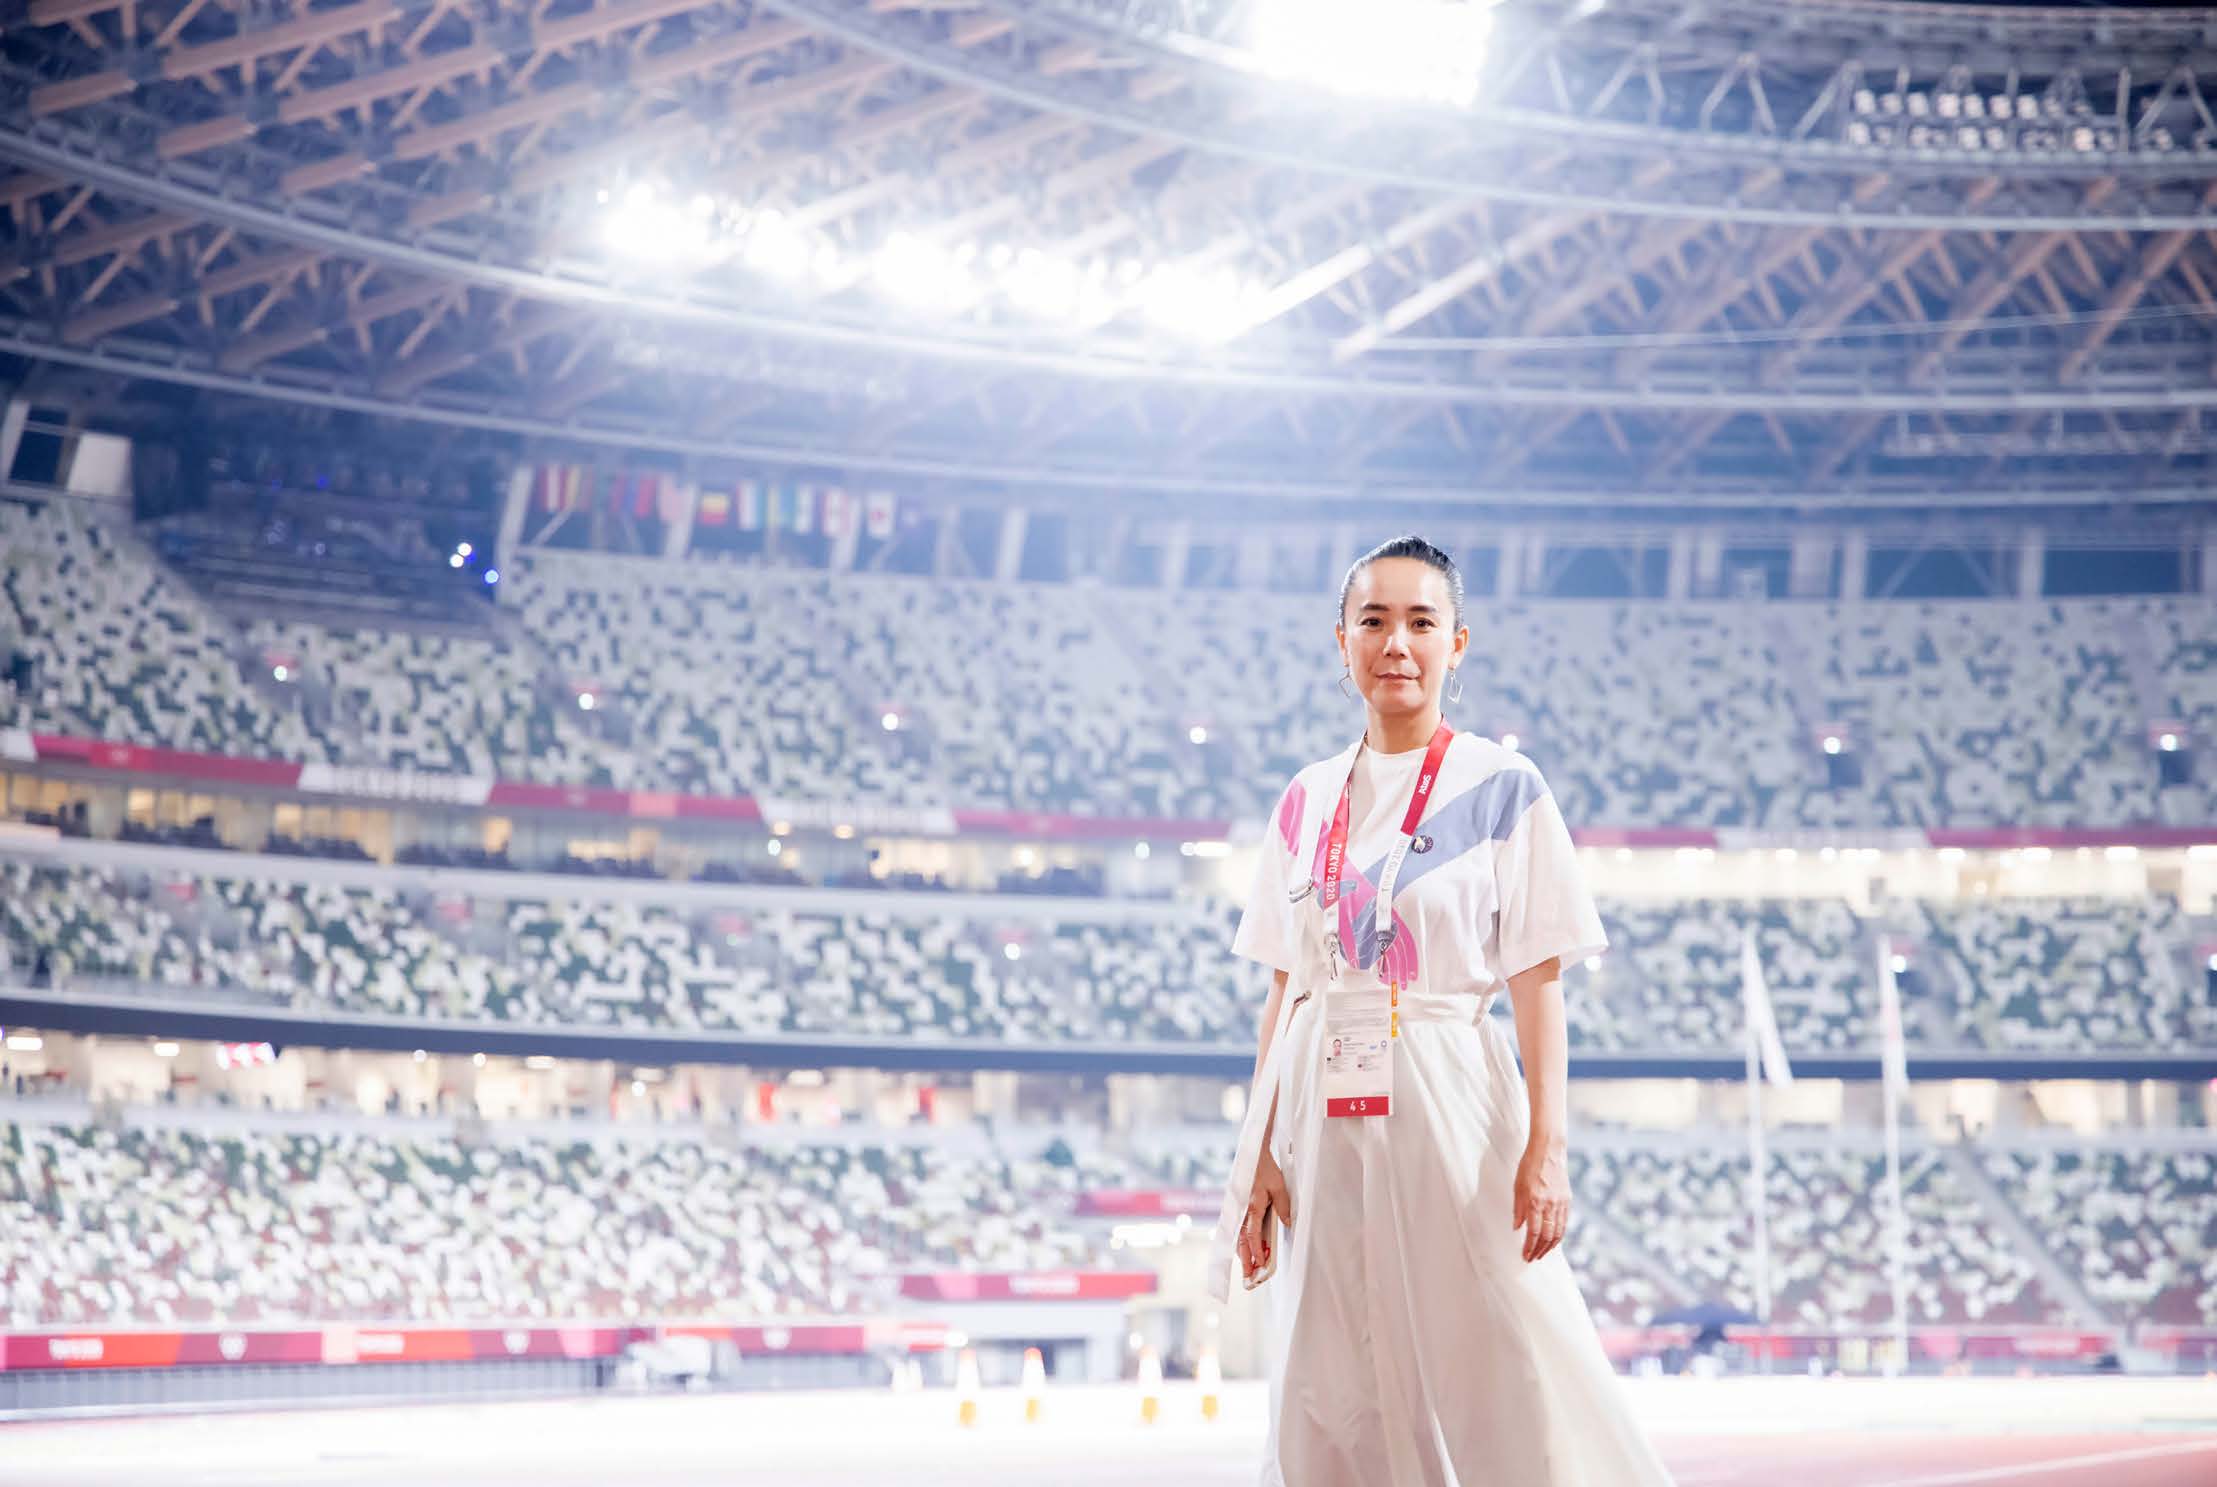 Naomi Kawase, Director of TOKYO 2020. Photo ©2022 International Olympic Committee. All Rights Reserved.